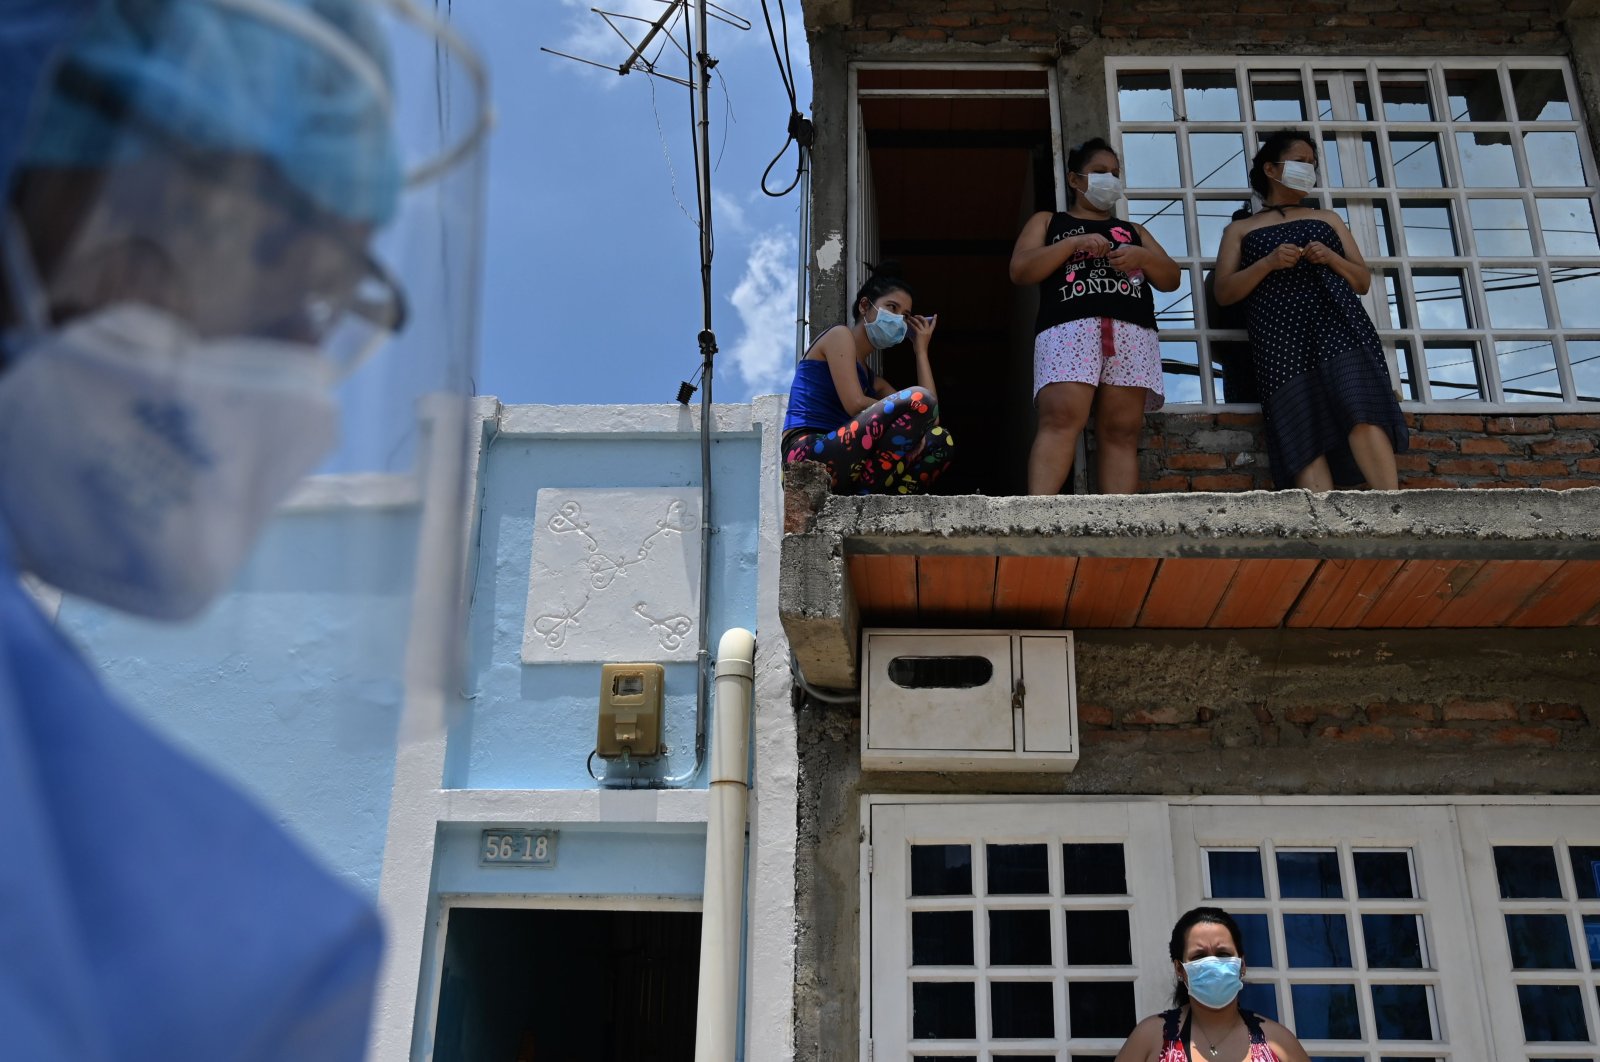 Locals look out from their house as health workers wearing biosafety suits carry out a checkup for the coronavirus at Nueva Floresta neighborhood in Cali, Colombia, on April 20, 2020.  (AFP)